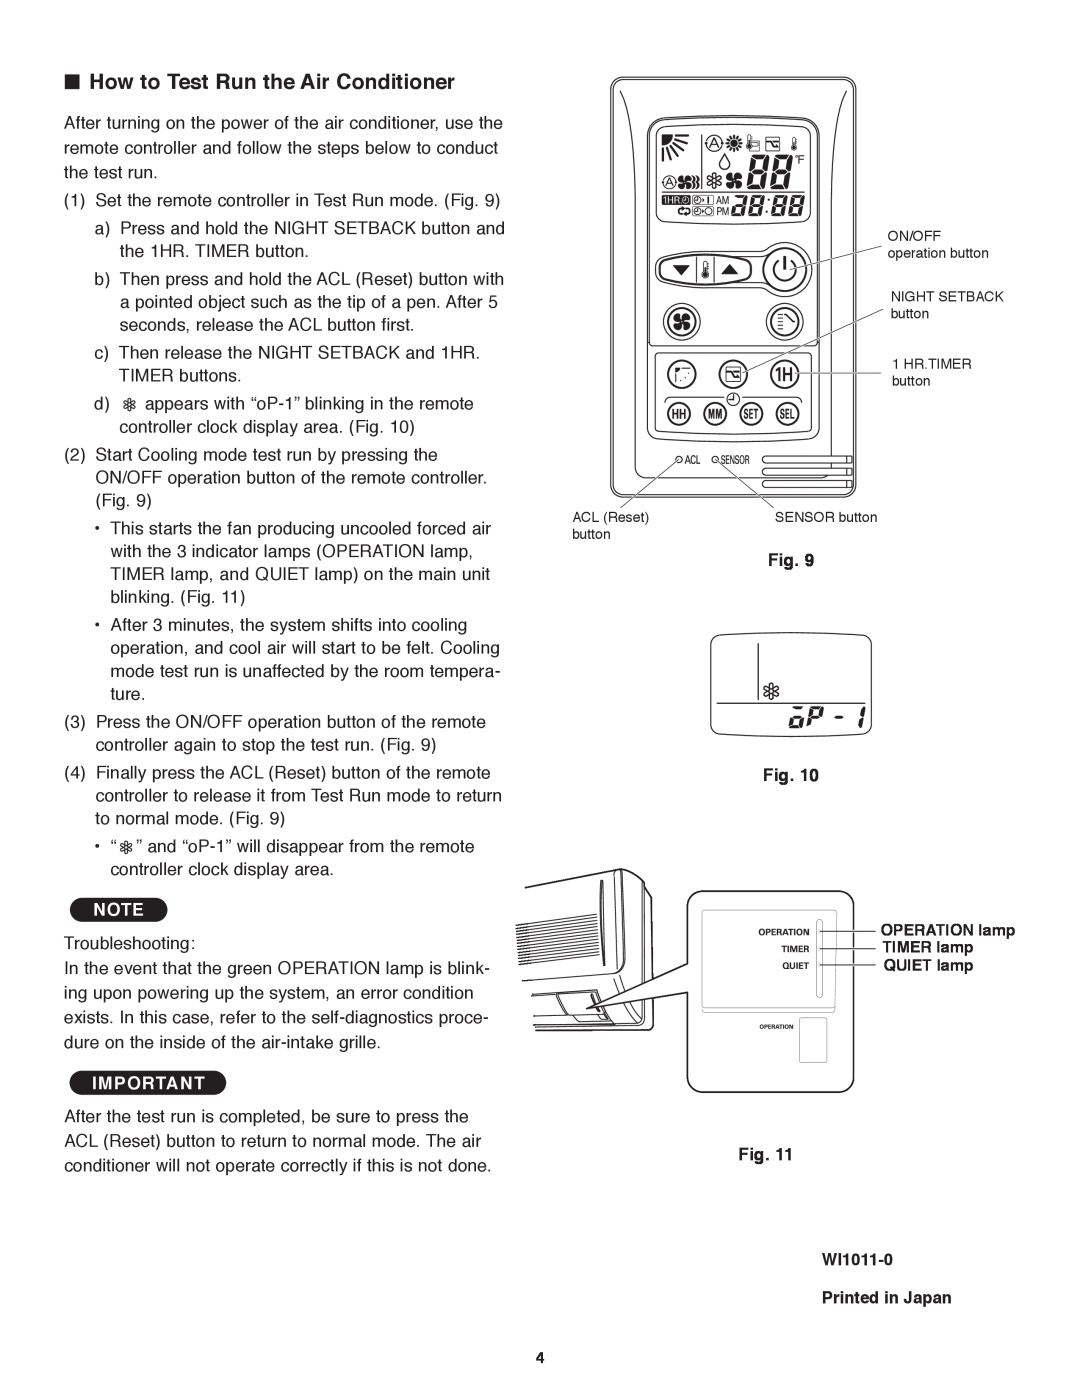 Panasonic CZ-RD515U service manual How to Test Run the Air Conditioner, Fig. Fig 